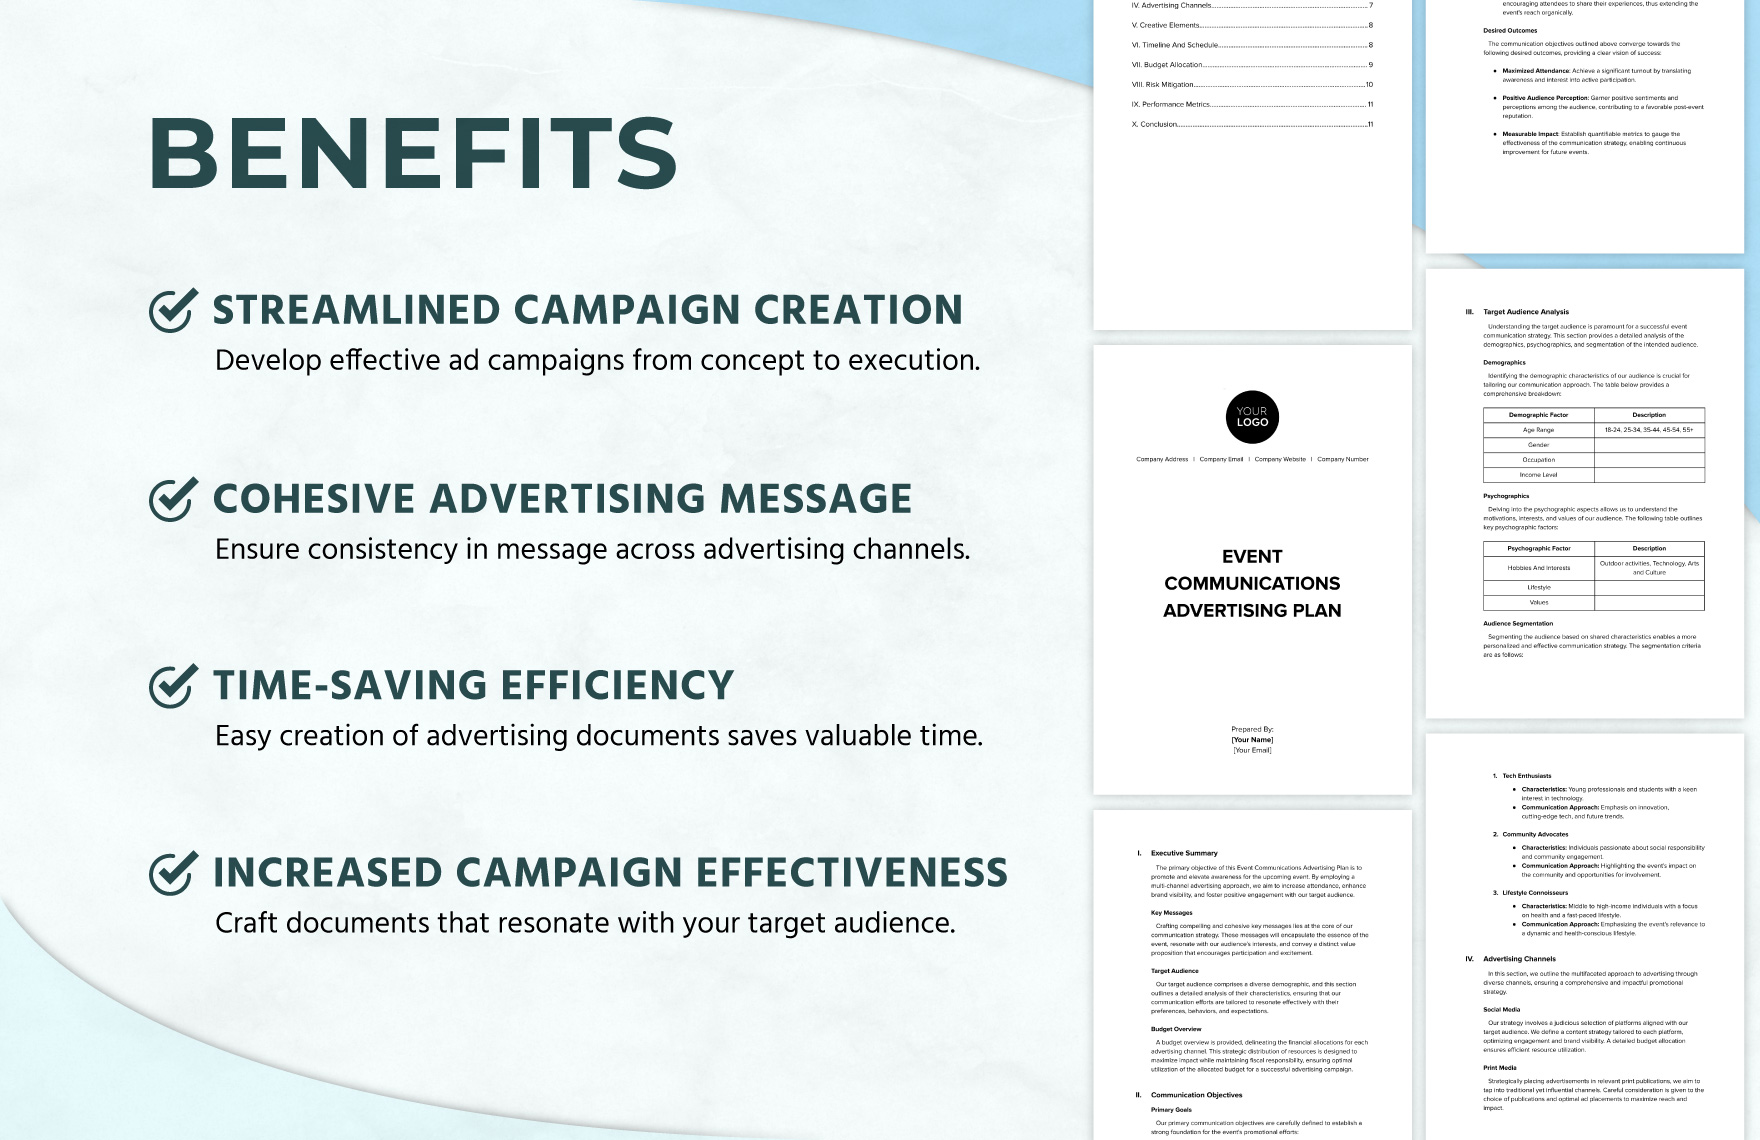 Event Communications Advertising Plan Template